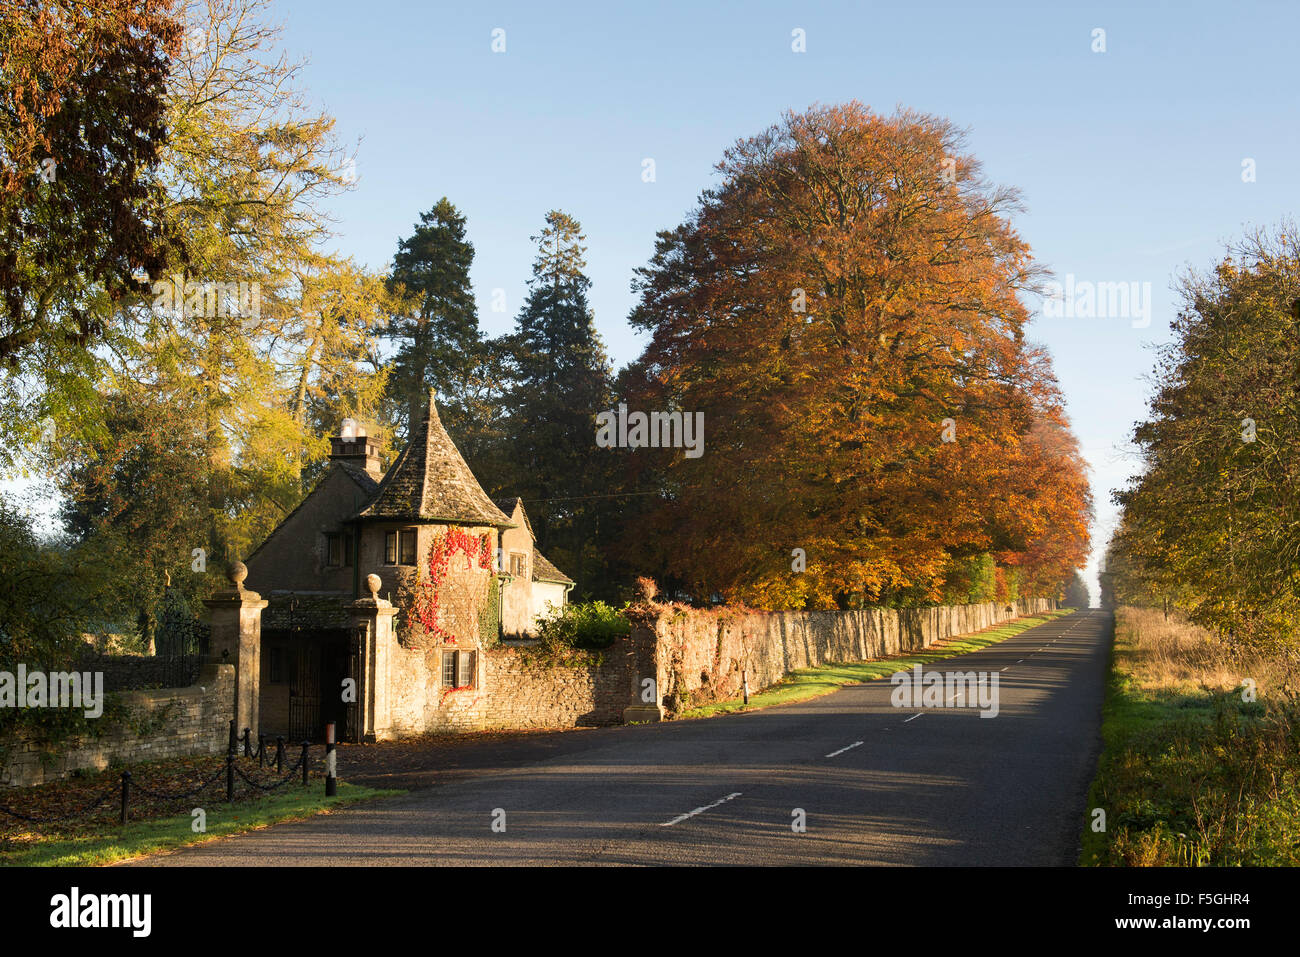 Stowell park estate gate house and beech trees with autumn foilage in the cotswold countryside. Gloucestershire, England. Stock Photo